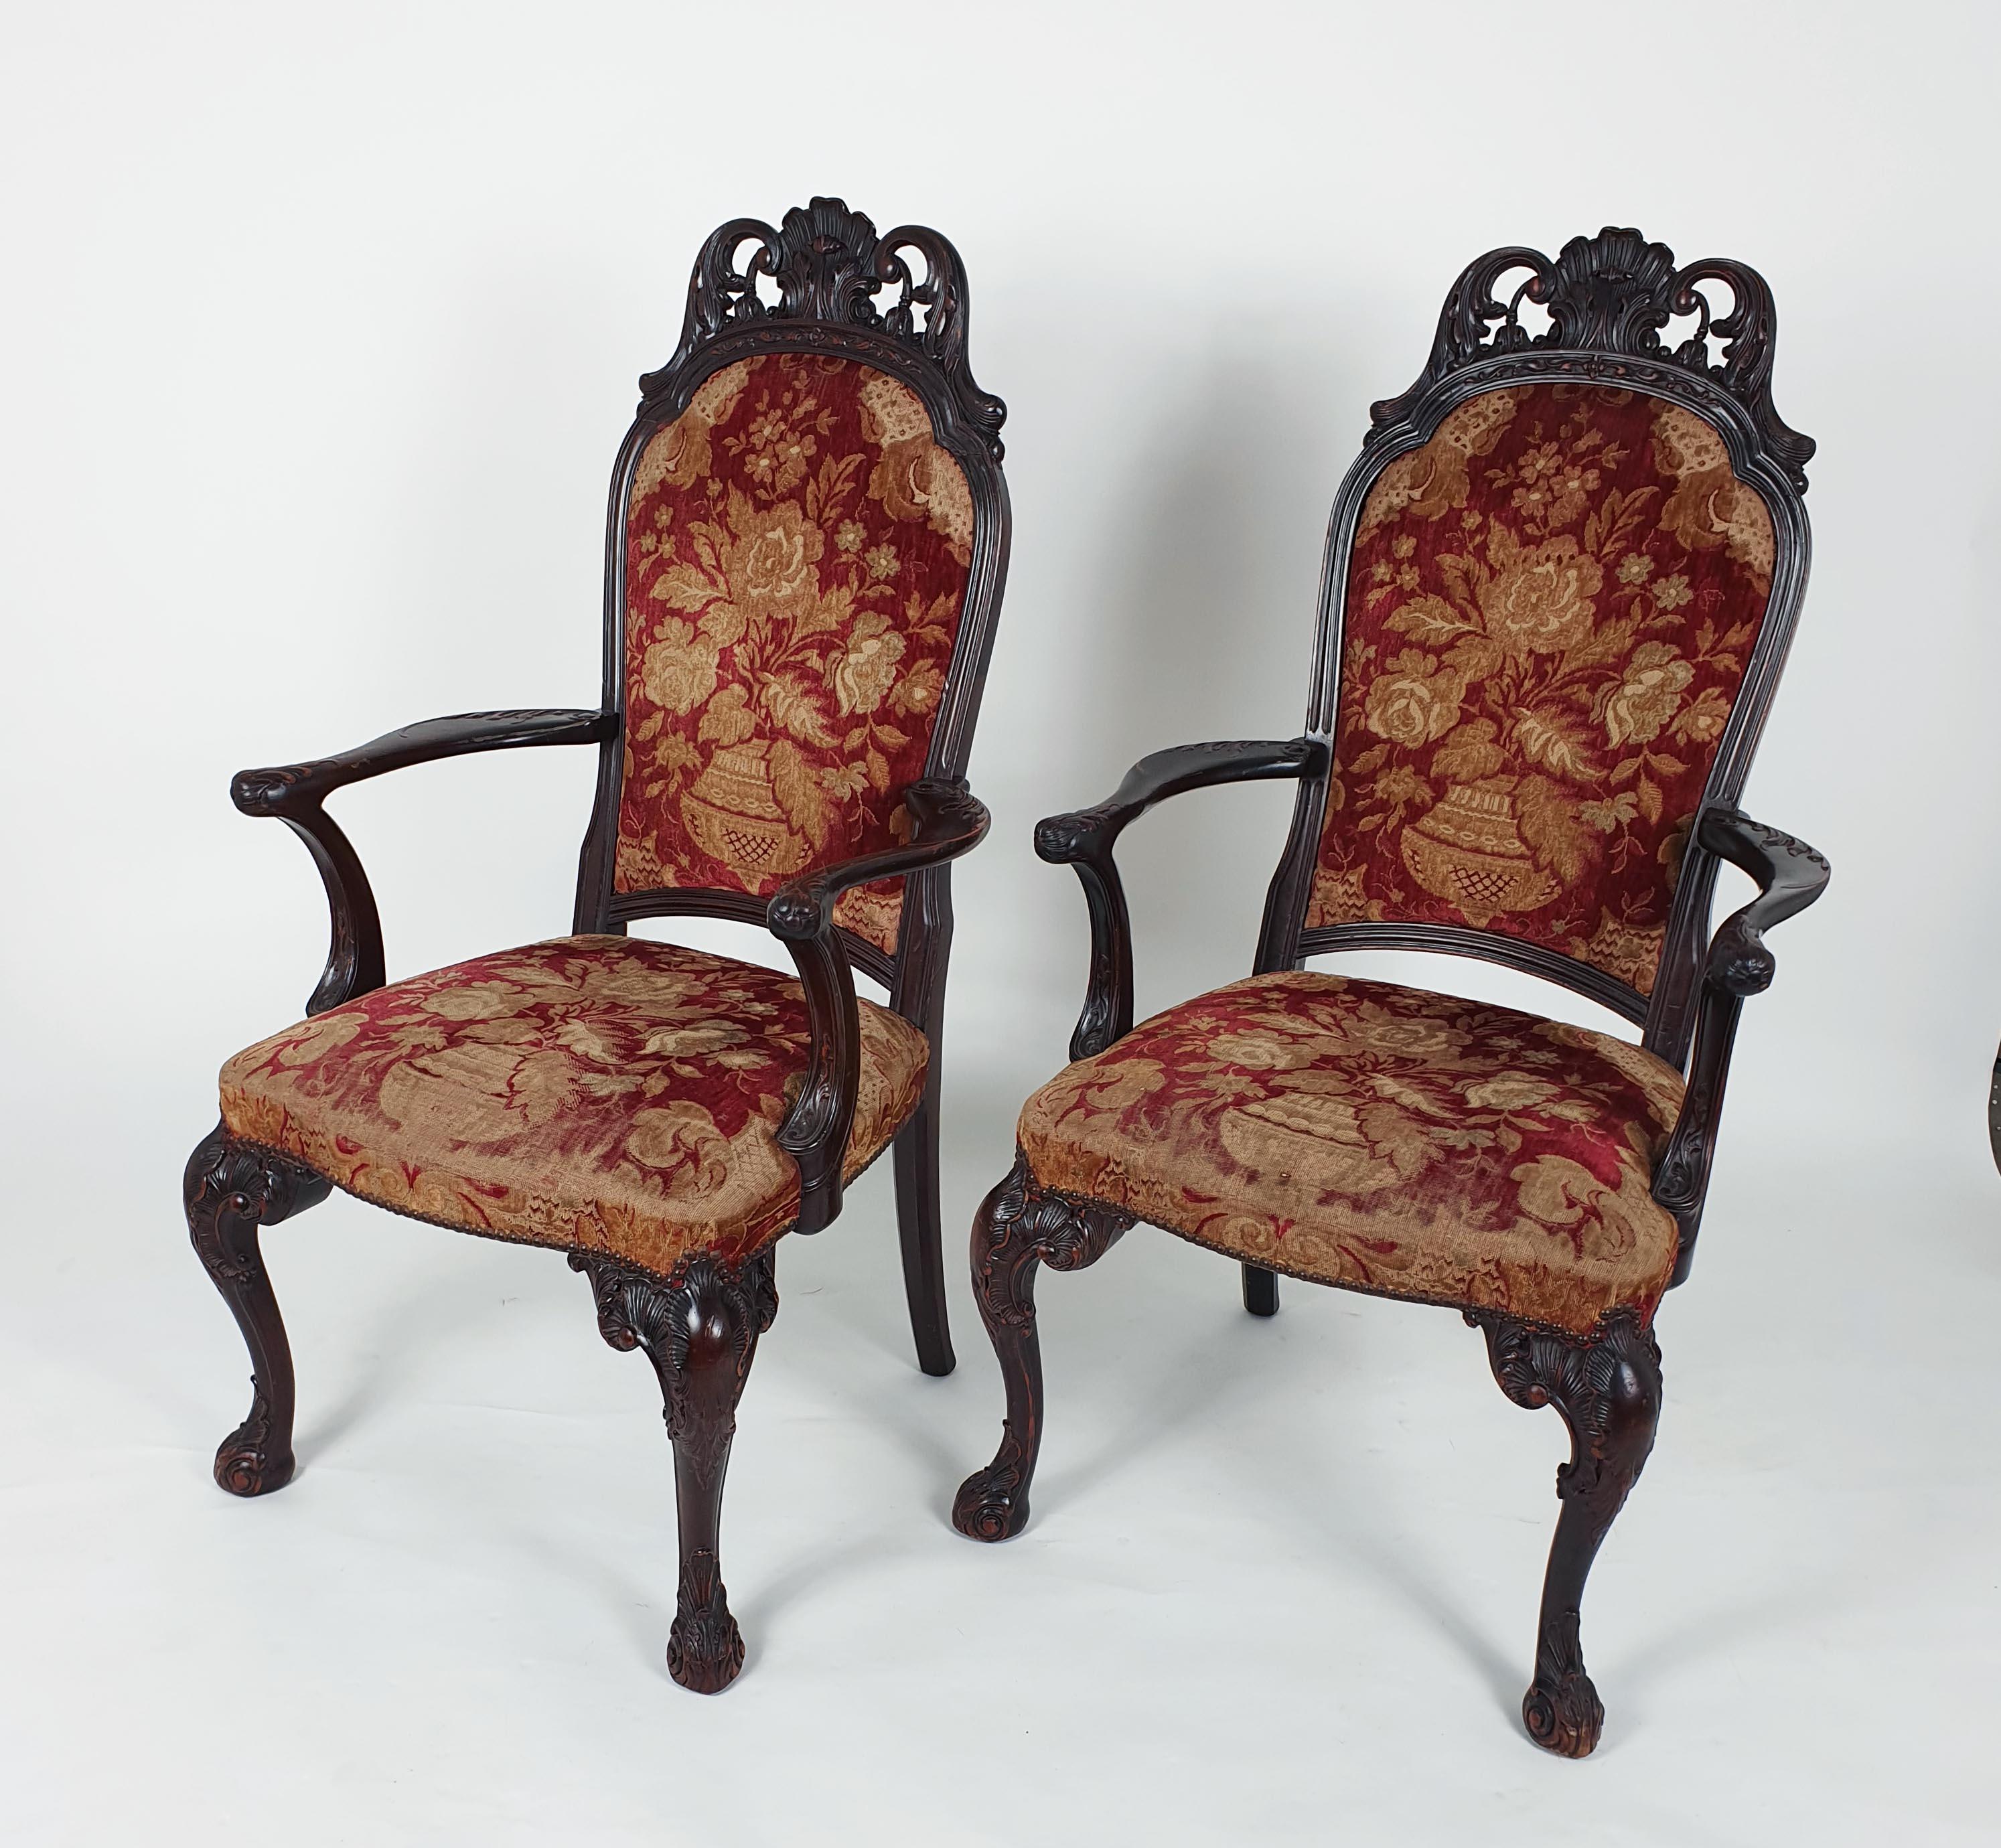 This beautiful set of 19th century Italian carved walnut armchairs feature pierced and carved cresting rails, supported on ornately carved front cabriole legs with shell detail and swept back legs. The worn cut velvet upholstery is original,